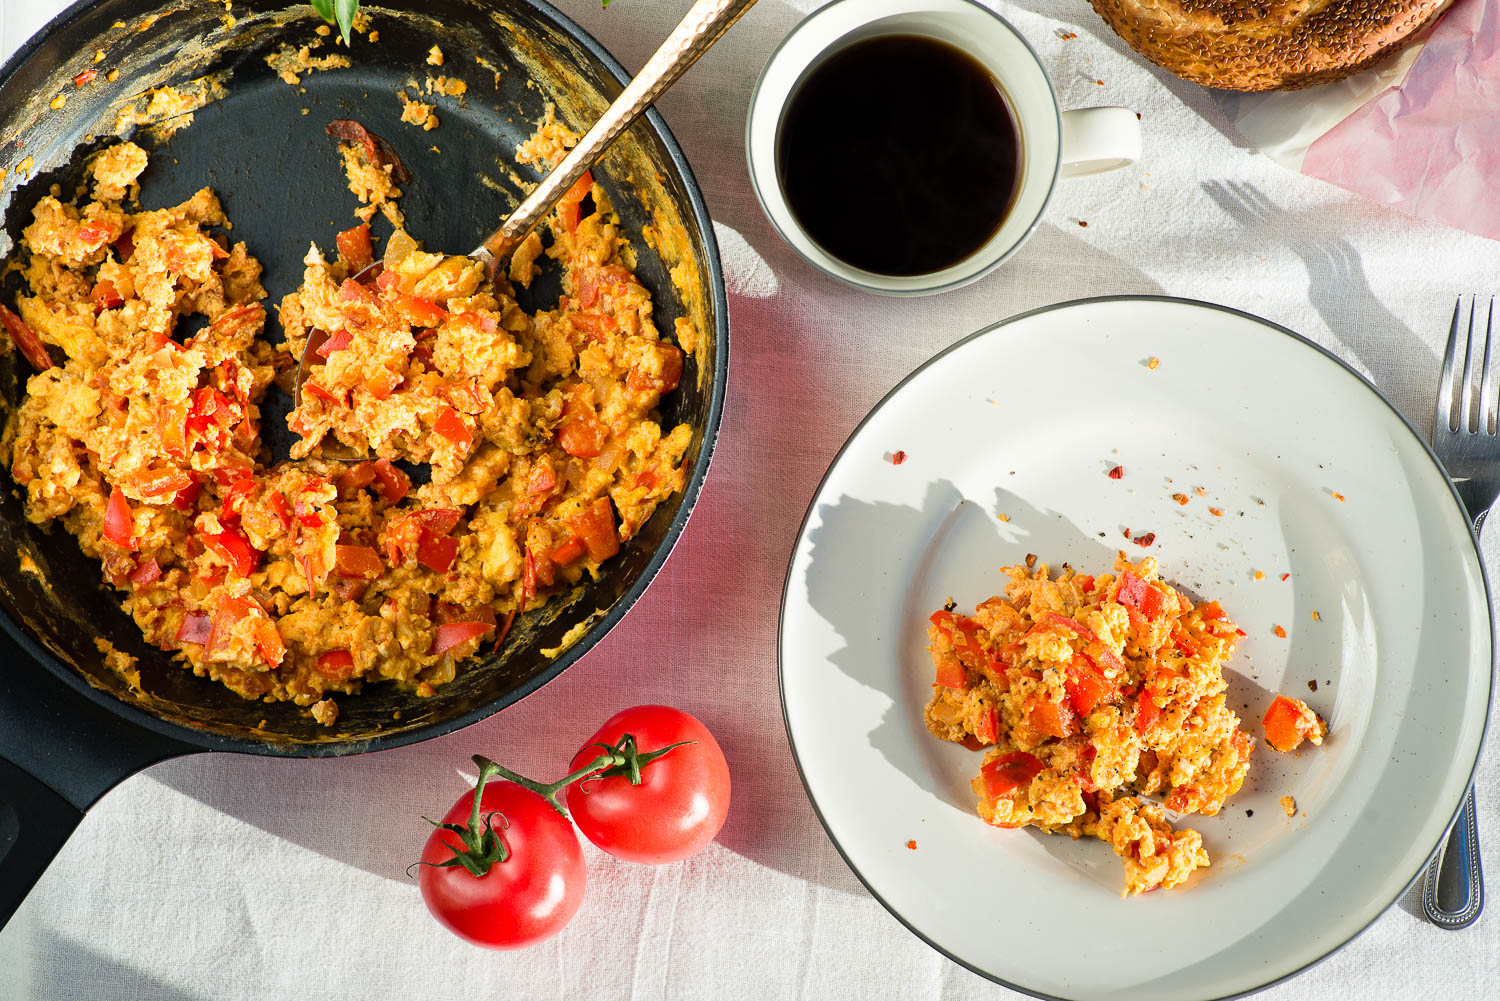 Menemen Turkish style scrambled eggs with tomatoes and peppers